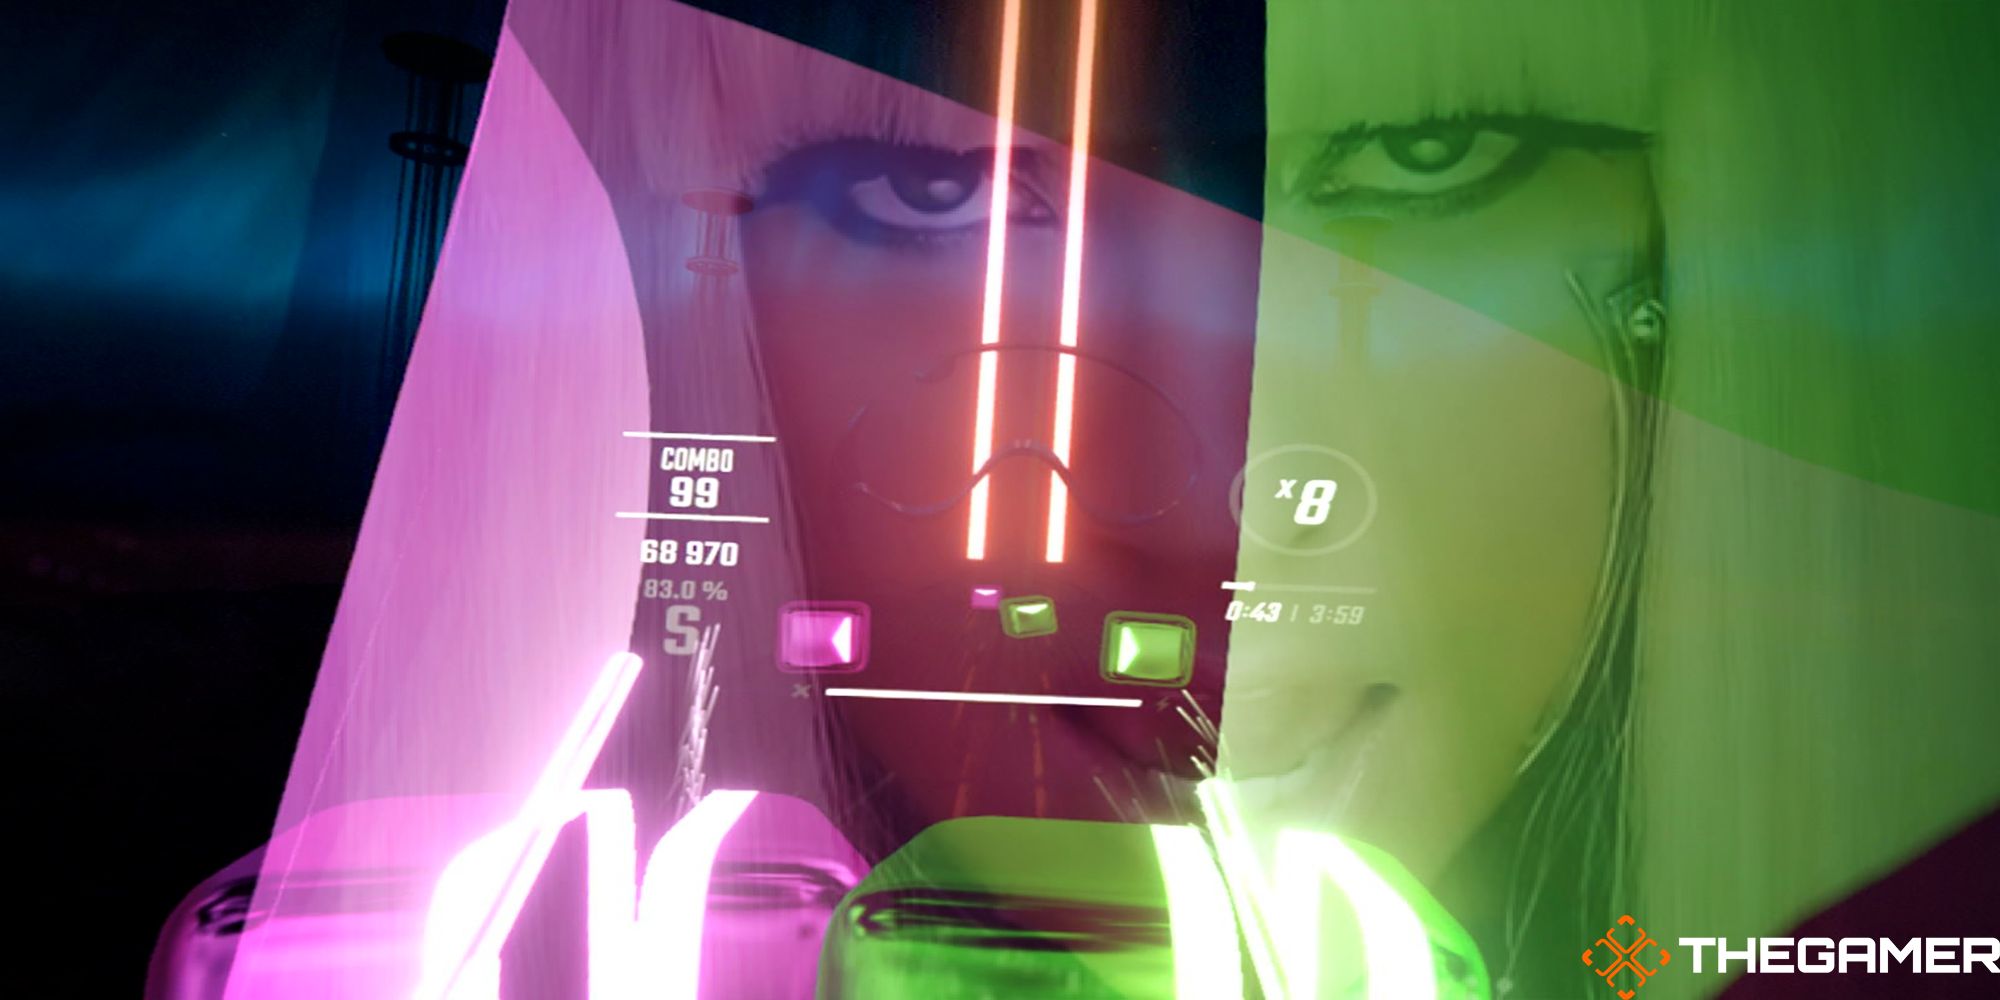 Custom image of gameplay overlayed with Lady Gaga's "Poker Face" music video.